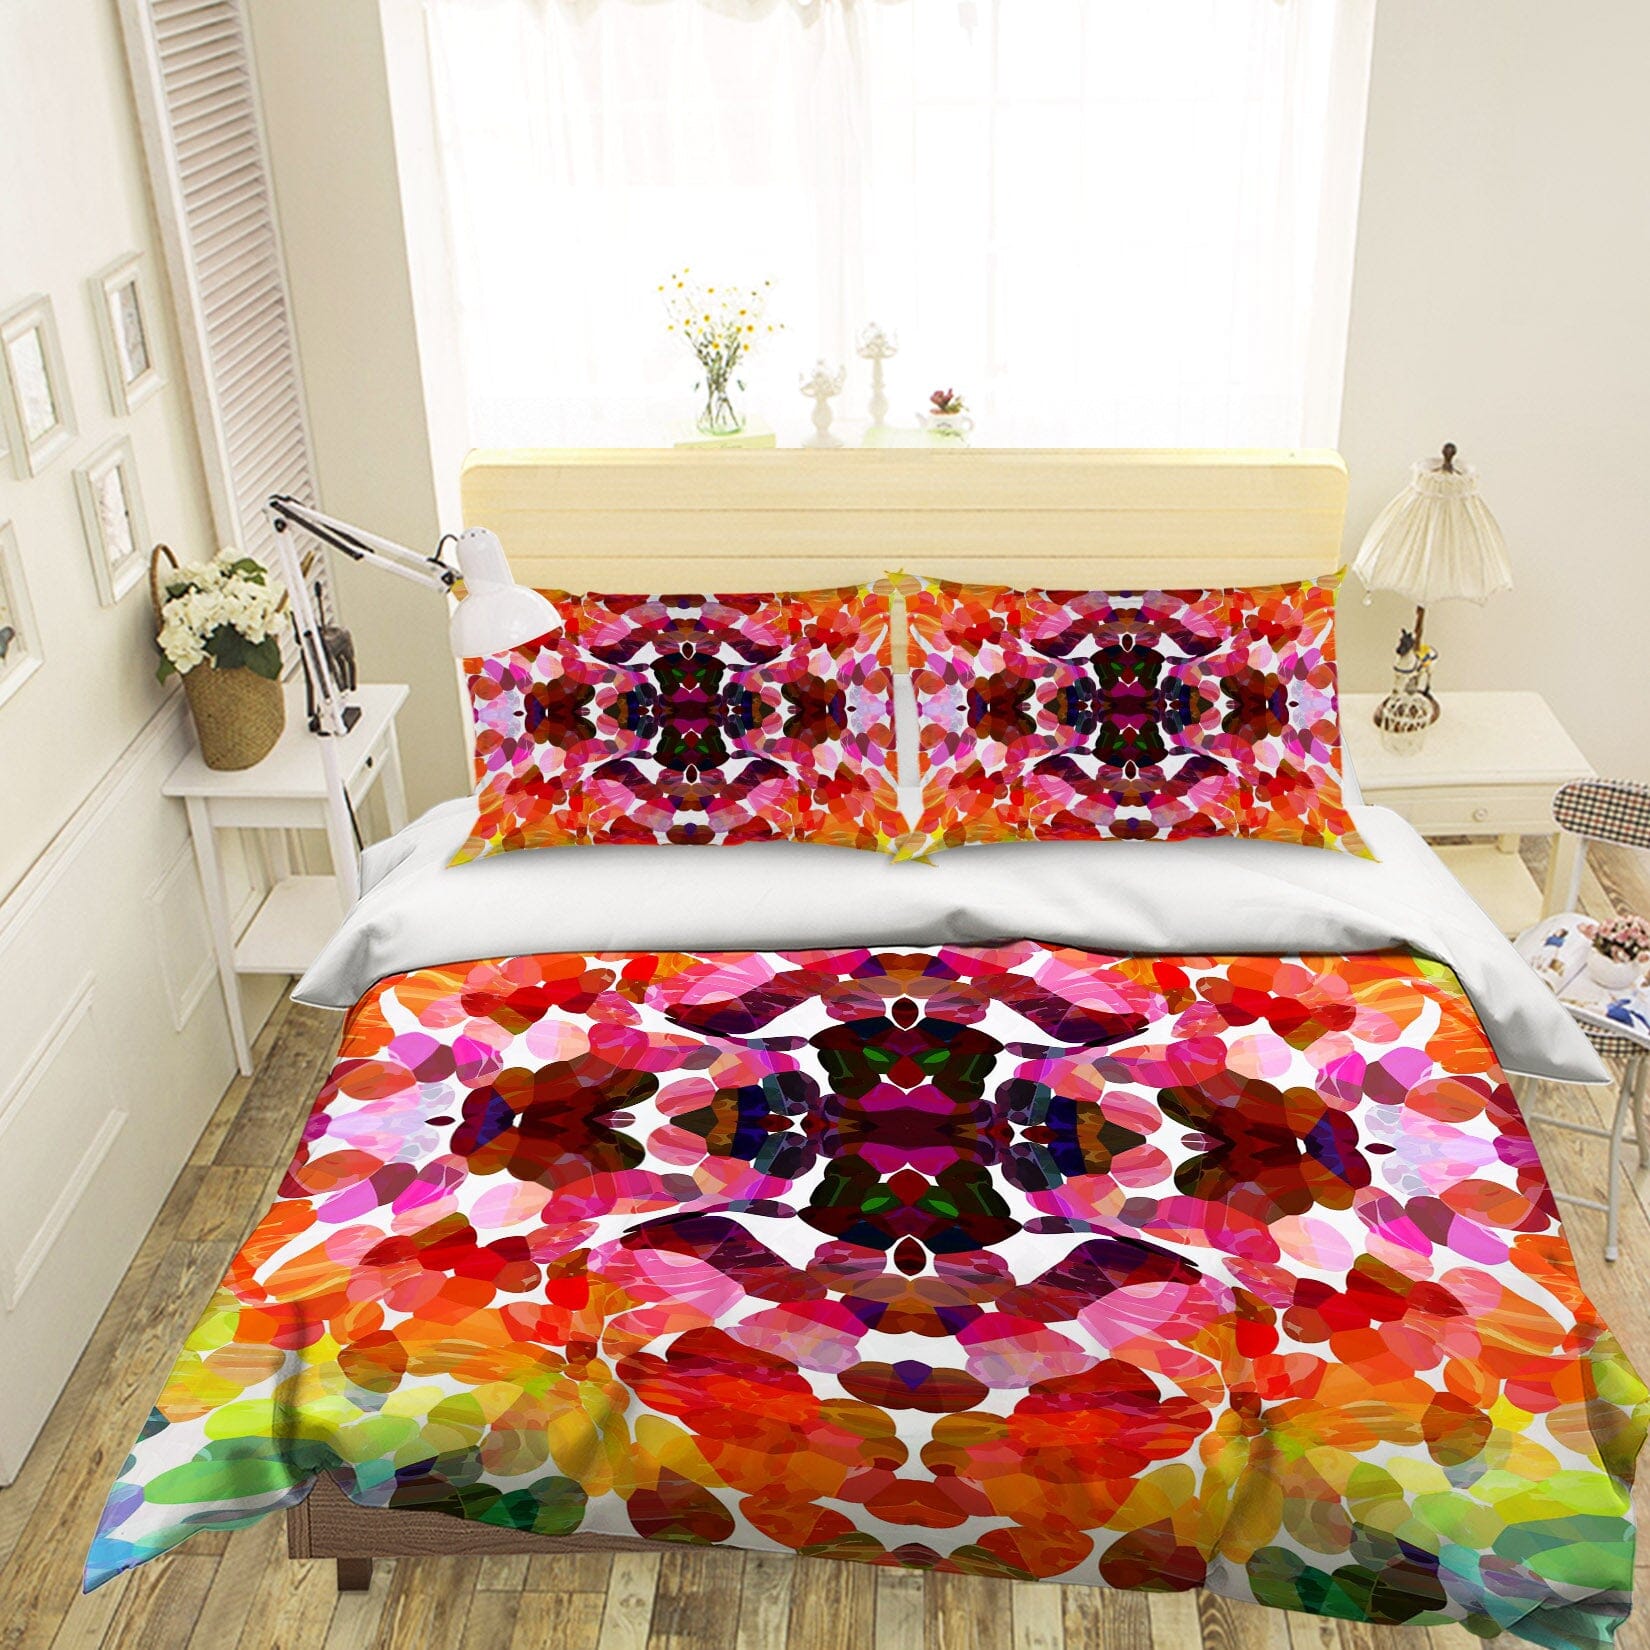 3D Colored Petals 2003 Shandra Smith Bedding Bed Pillowcases Quilt Quiet Covers AJ Creativity Home 